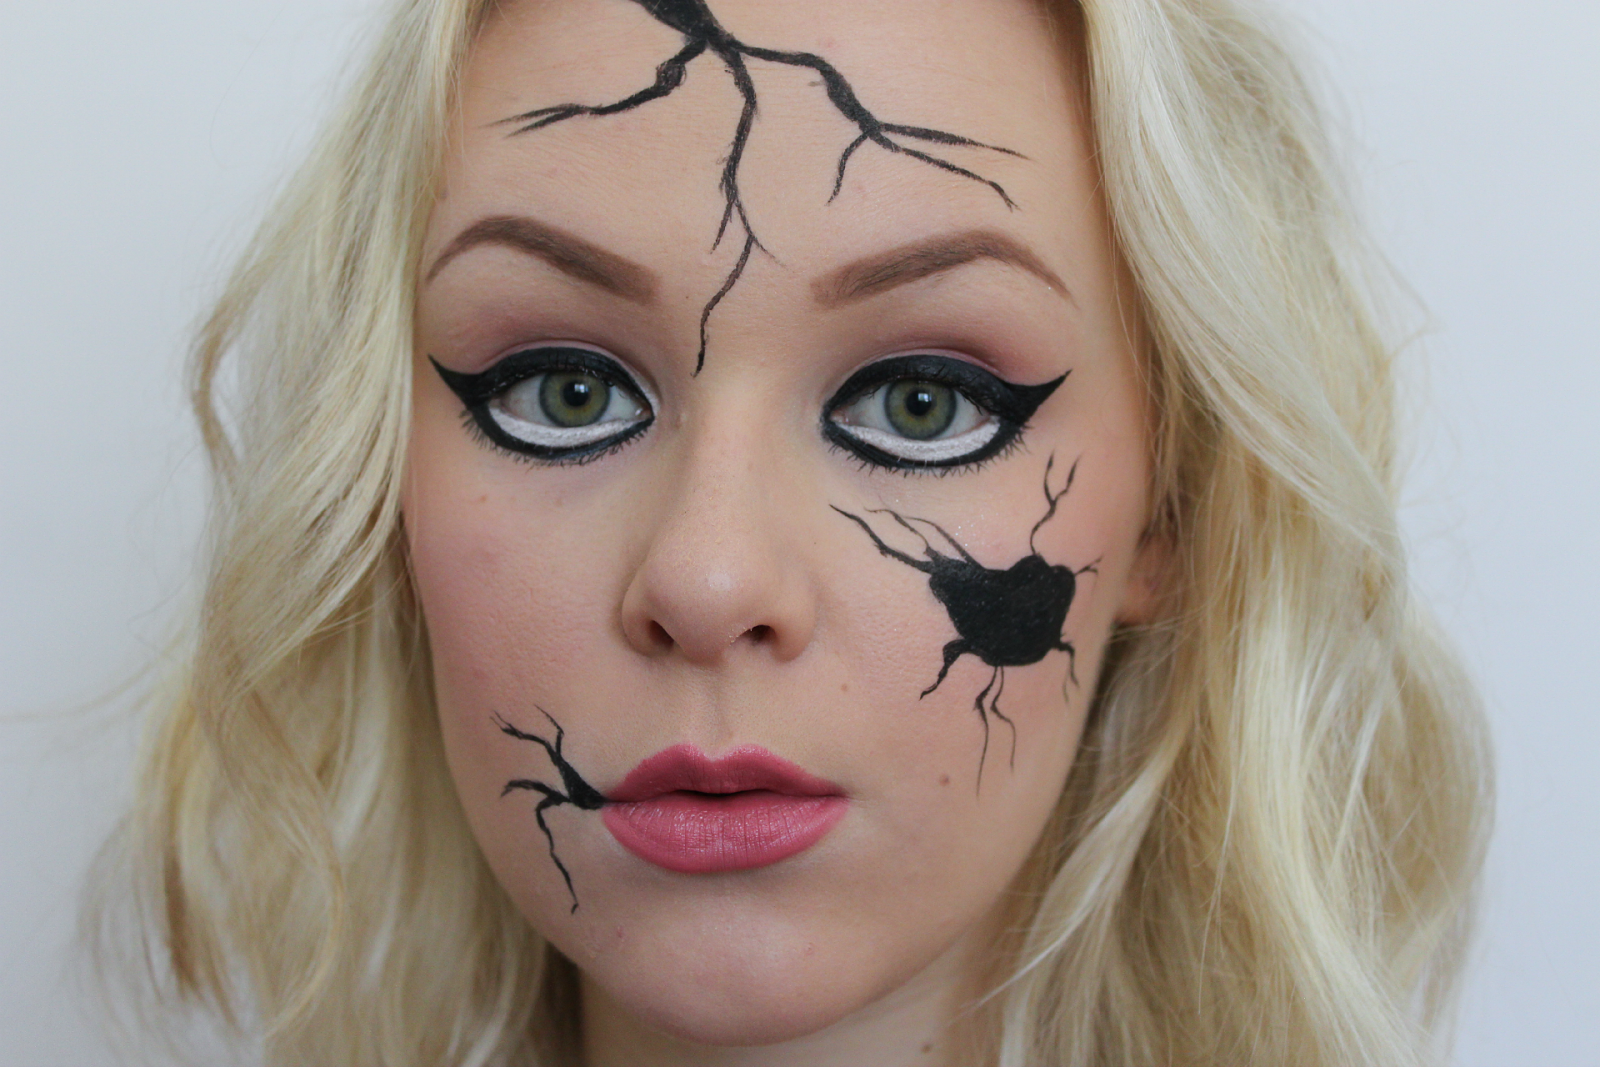 cracked doll makeup and costume